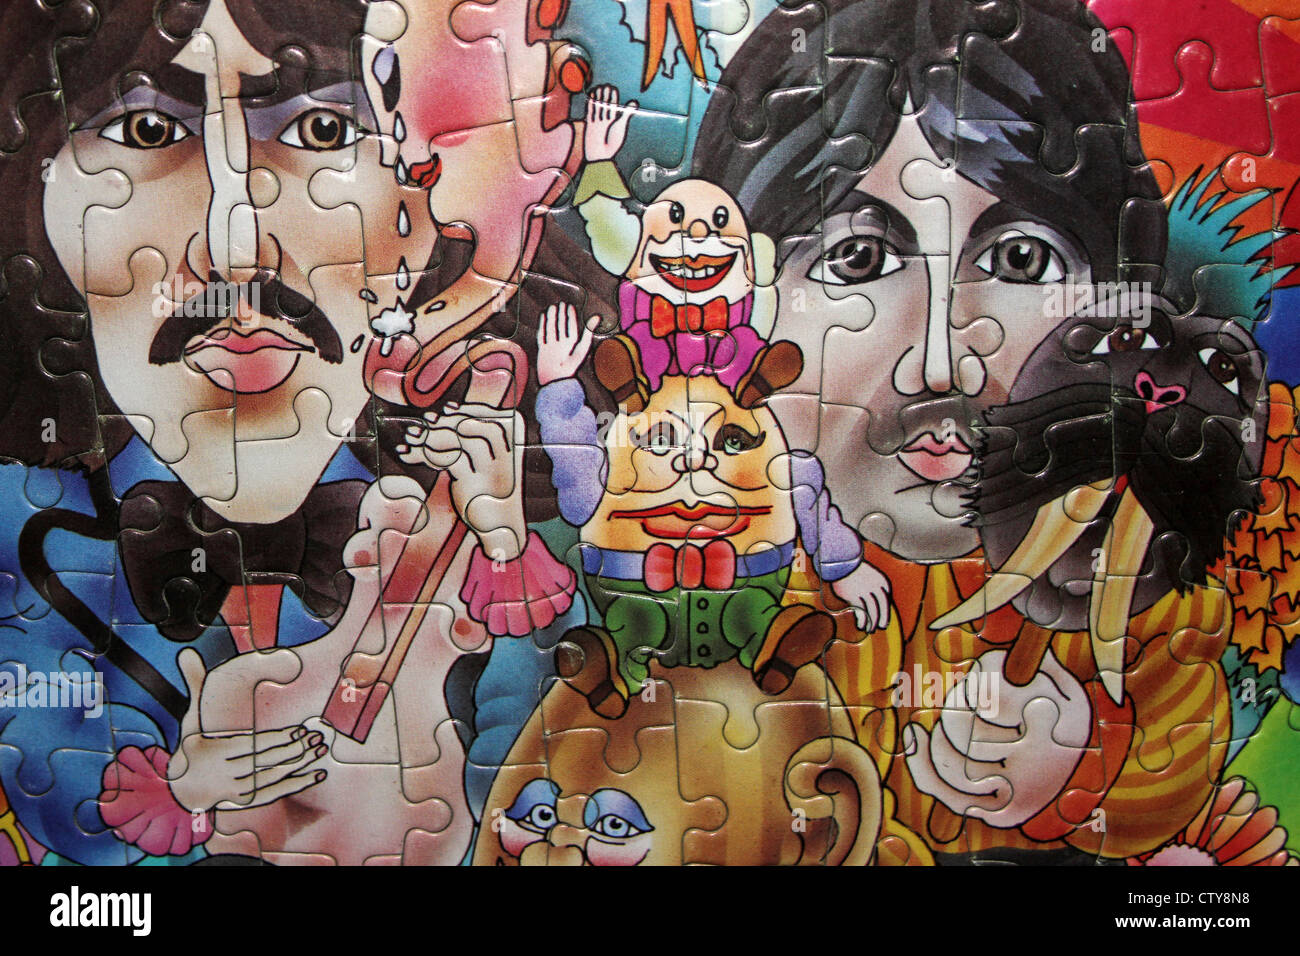 Beatles Jigsaw Showing George Harrison And Paul McCartney Along With Characters From The Song 'I Am The Walrus' Stock Photo